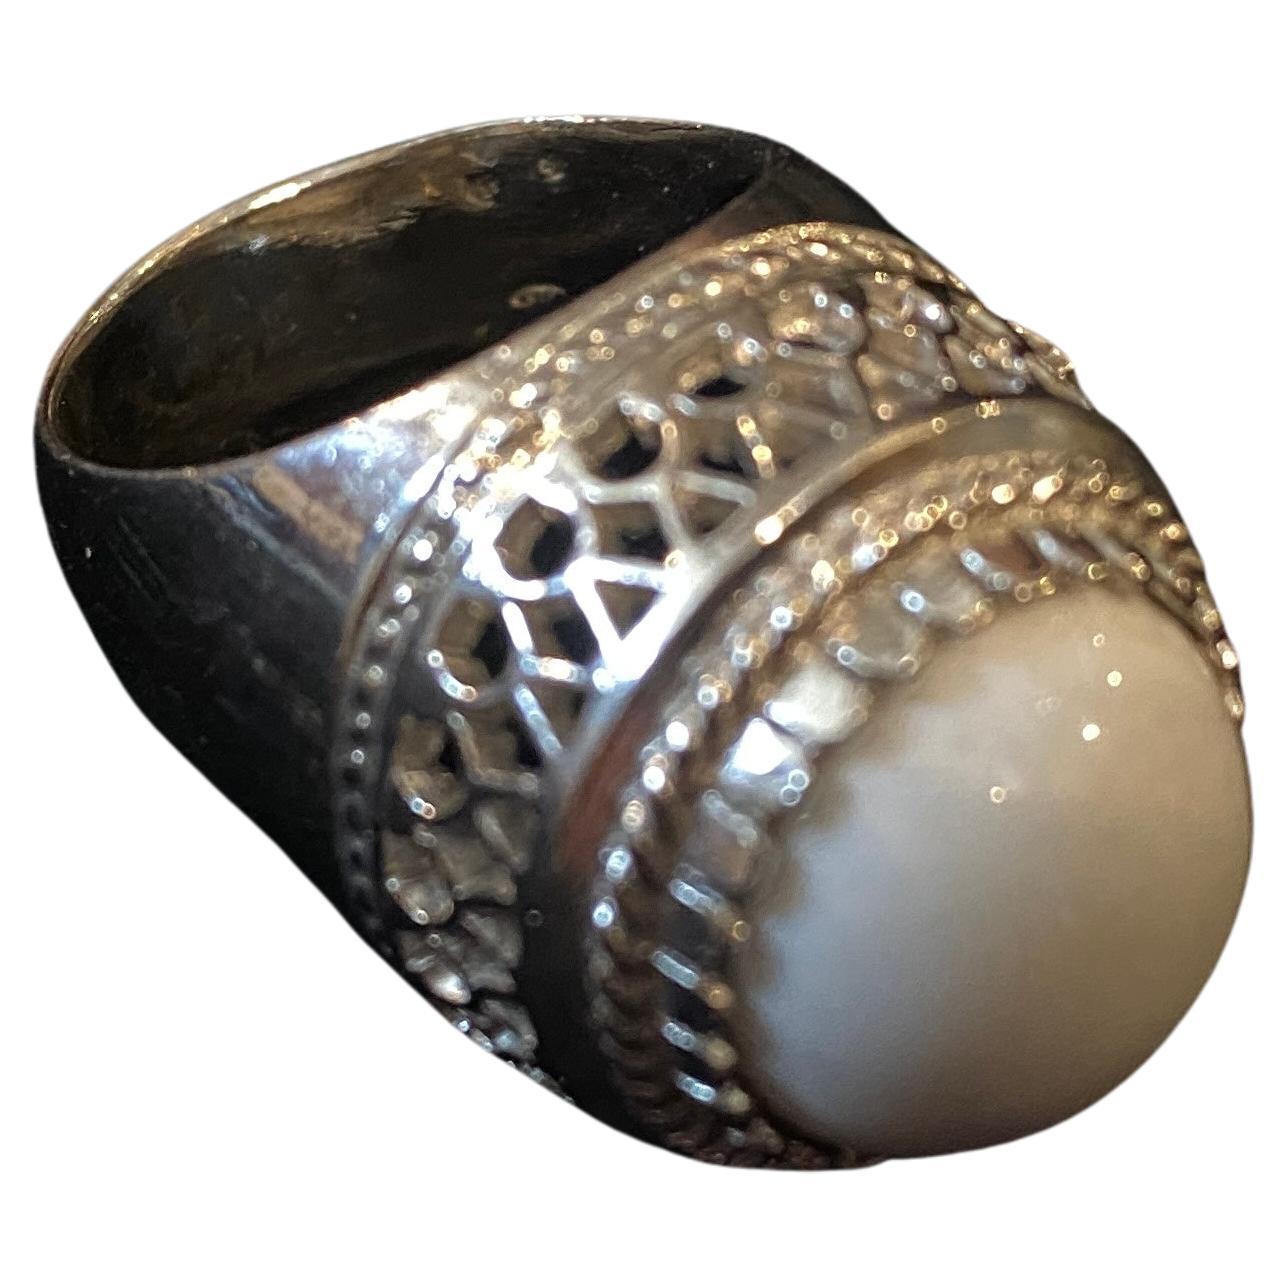 1990s Sterling Silver and  White Cabochon Agate Italian Cocktail Ring by Anomis